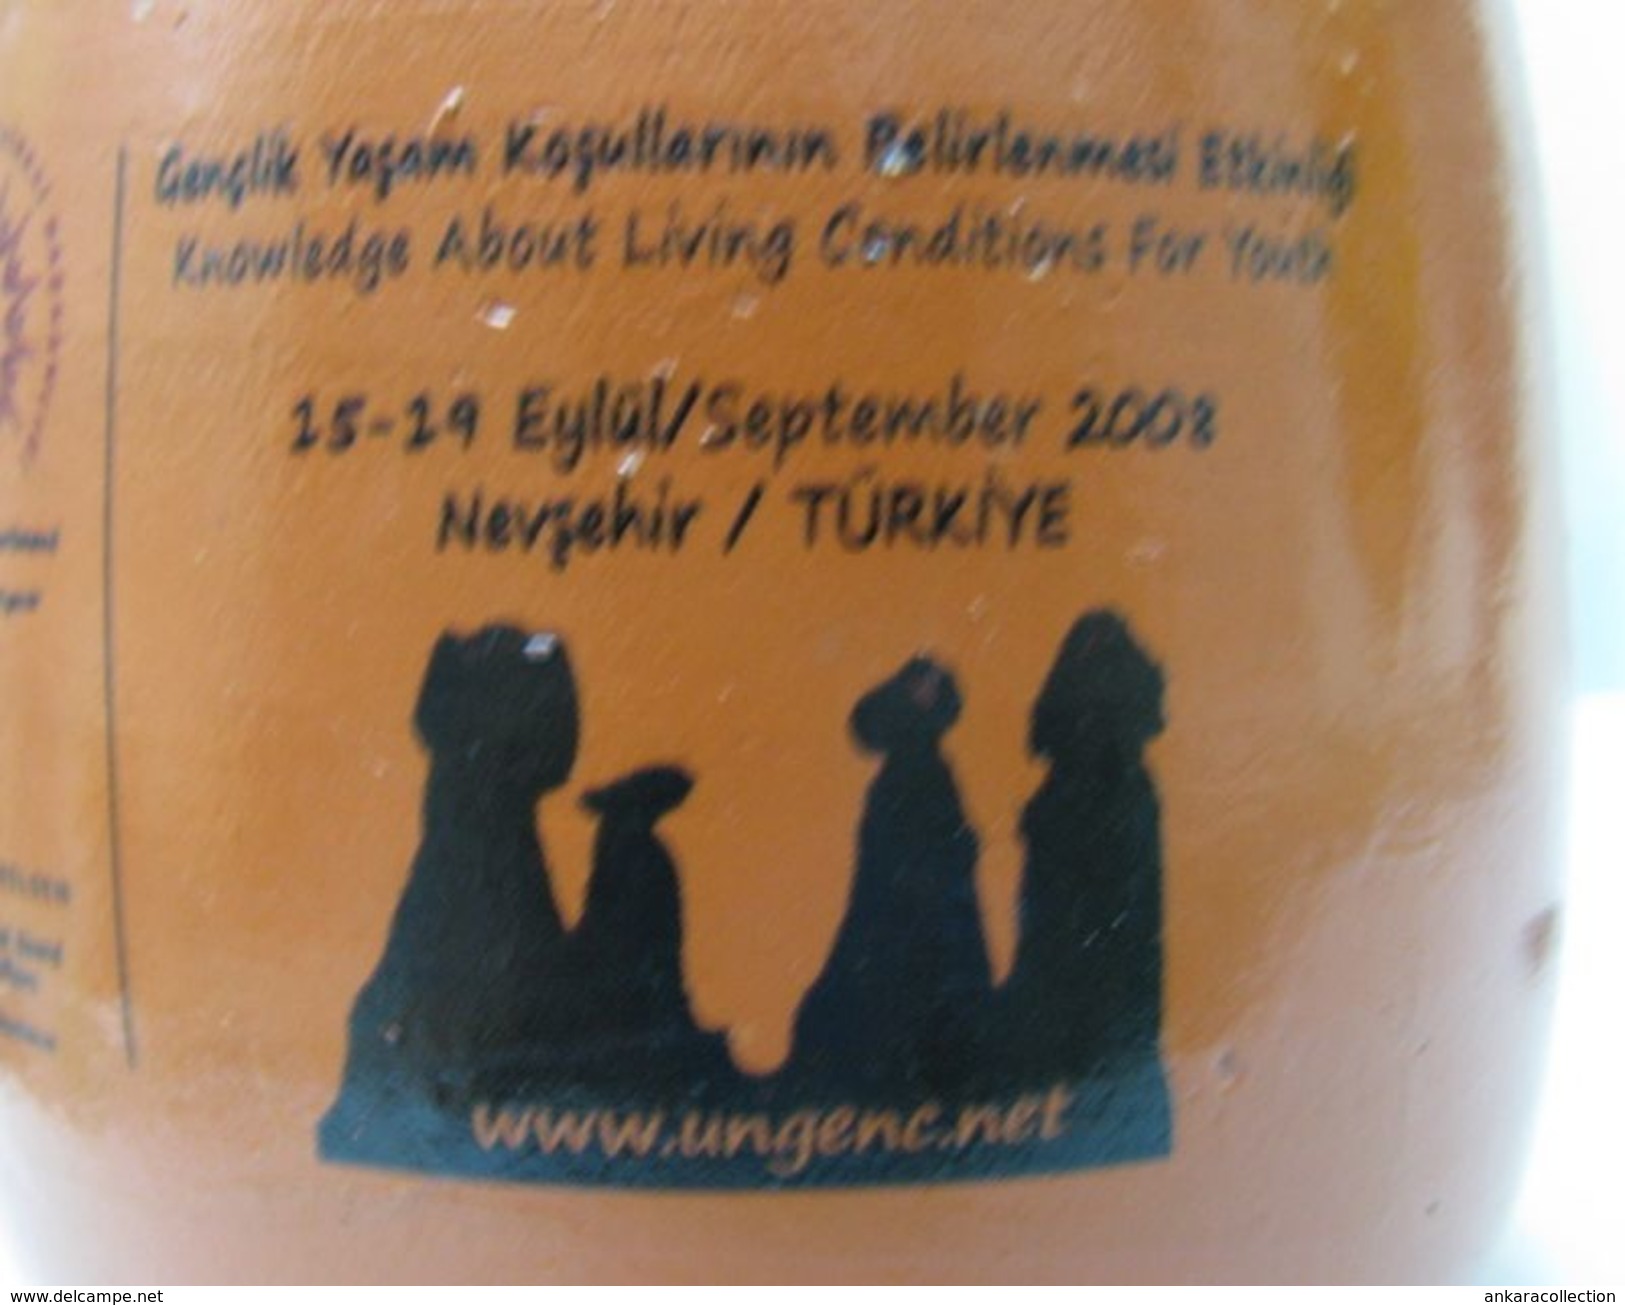 AC-  KNOWLEDGE ABOUT LIVING CONDITIONS FOR YOUTH 15 - 19 SEPTEMBER 2008 NEVSEHIR TURKEY SWEDISH NATIONAL BOARD FOR YOUTH - Cups